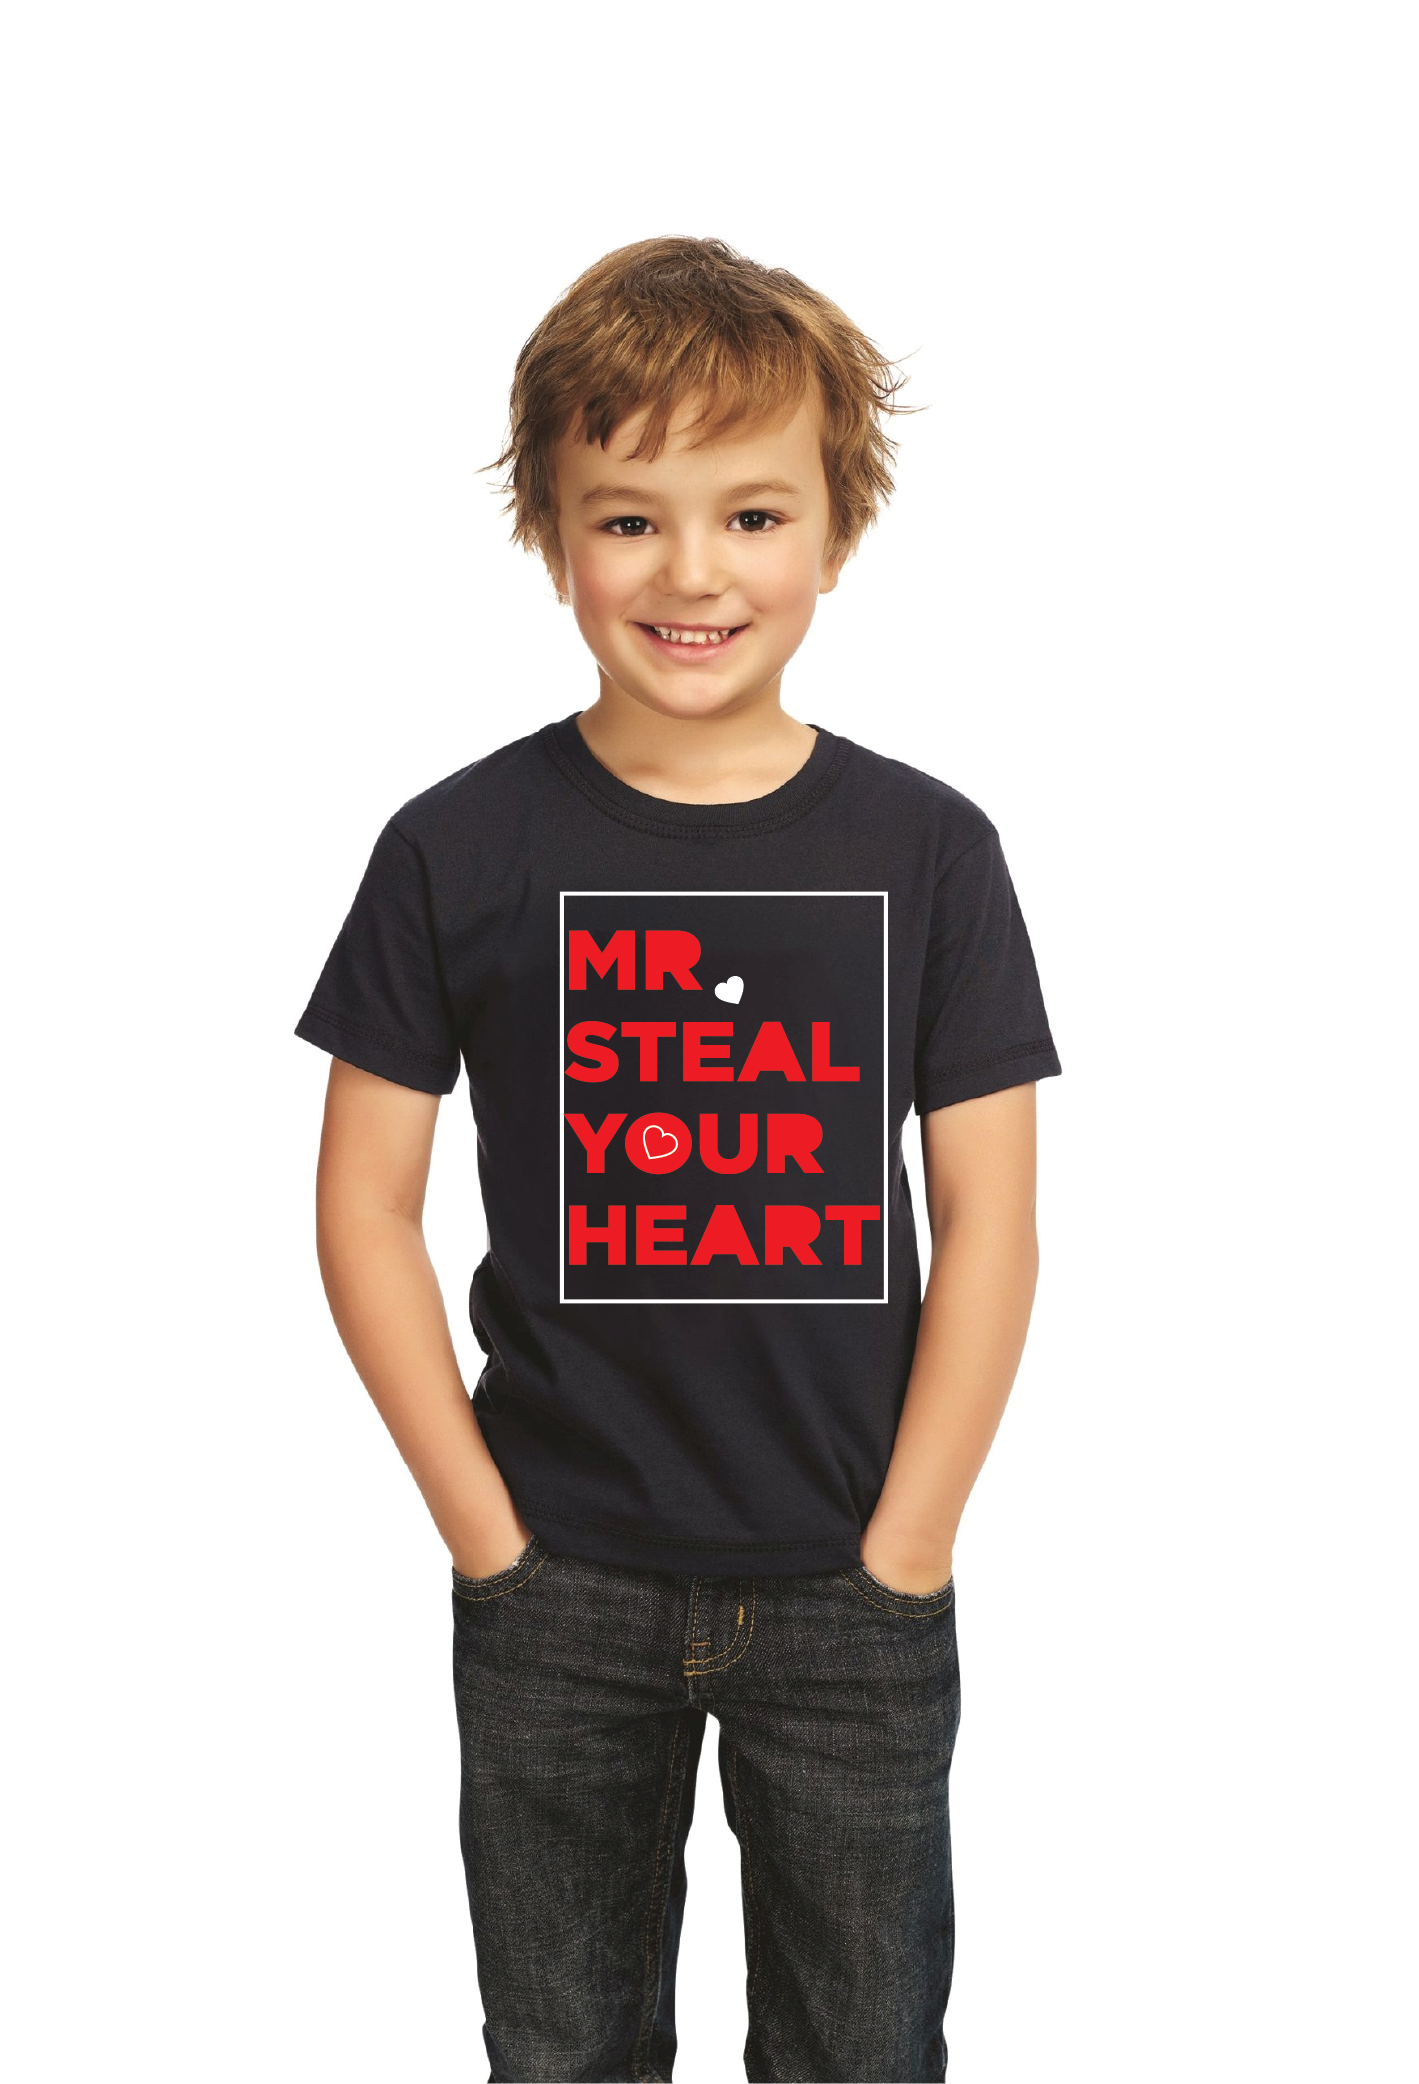 Mr Steal Your Heart t shirt